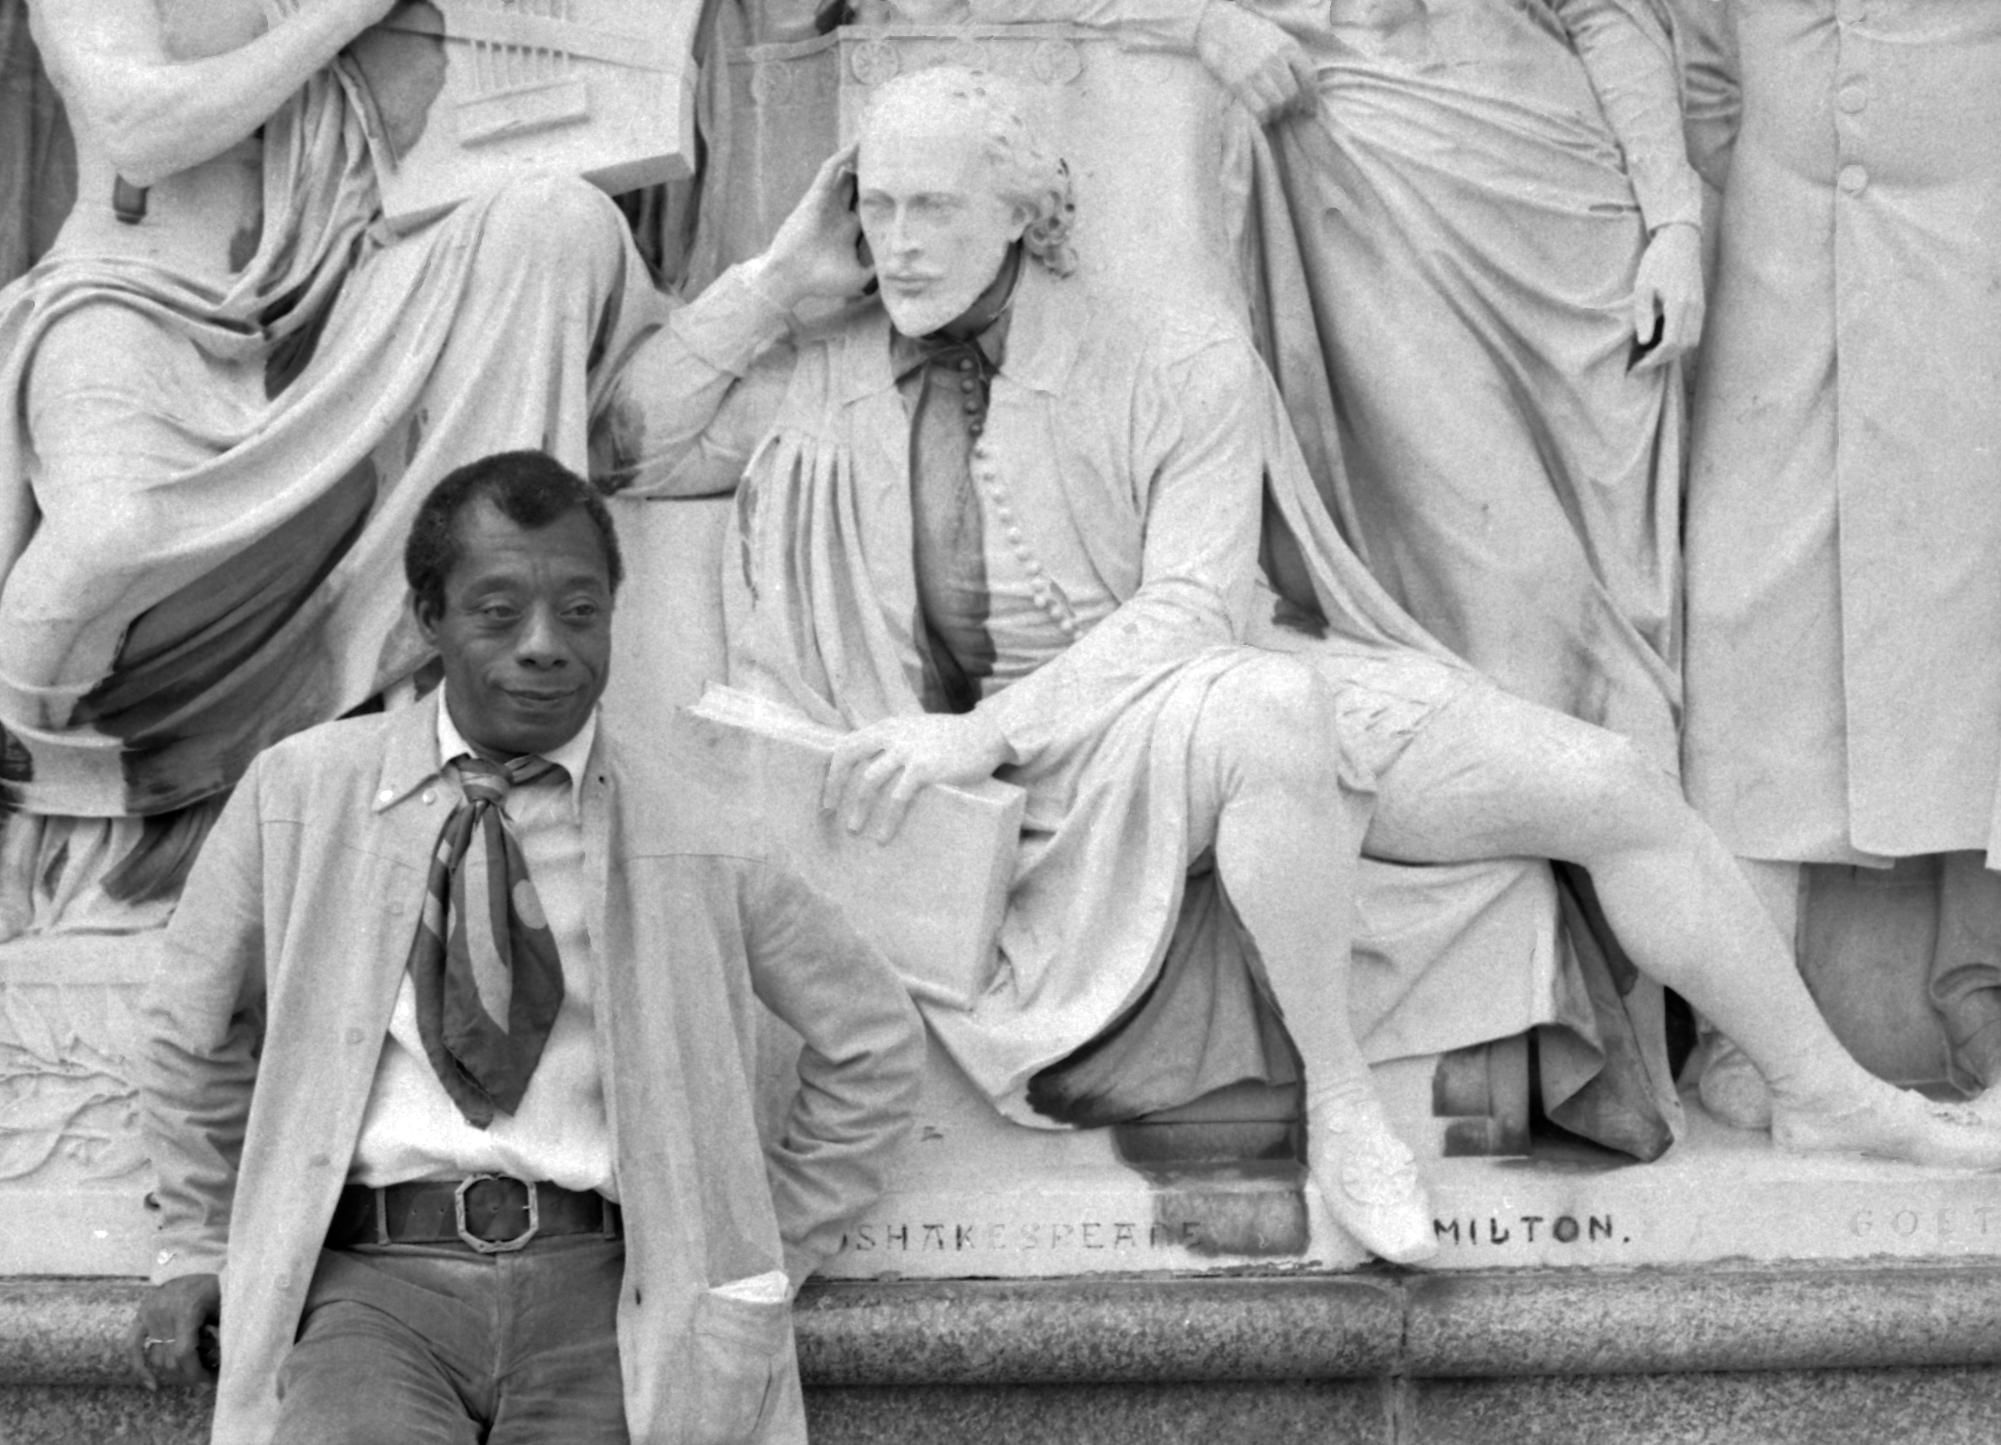 James Baldwin traveled to London in 1968; here, he is pictured at the Albert Memorial next to a statue of William Shakespeare, a key figure in the traditional Western canon. (Photo Credit: Allan warren, CC BY-SA 3.0 , via Wikimedia Commons)